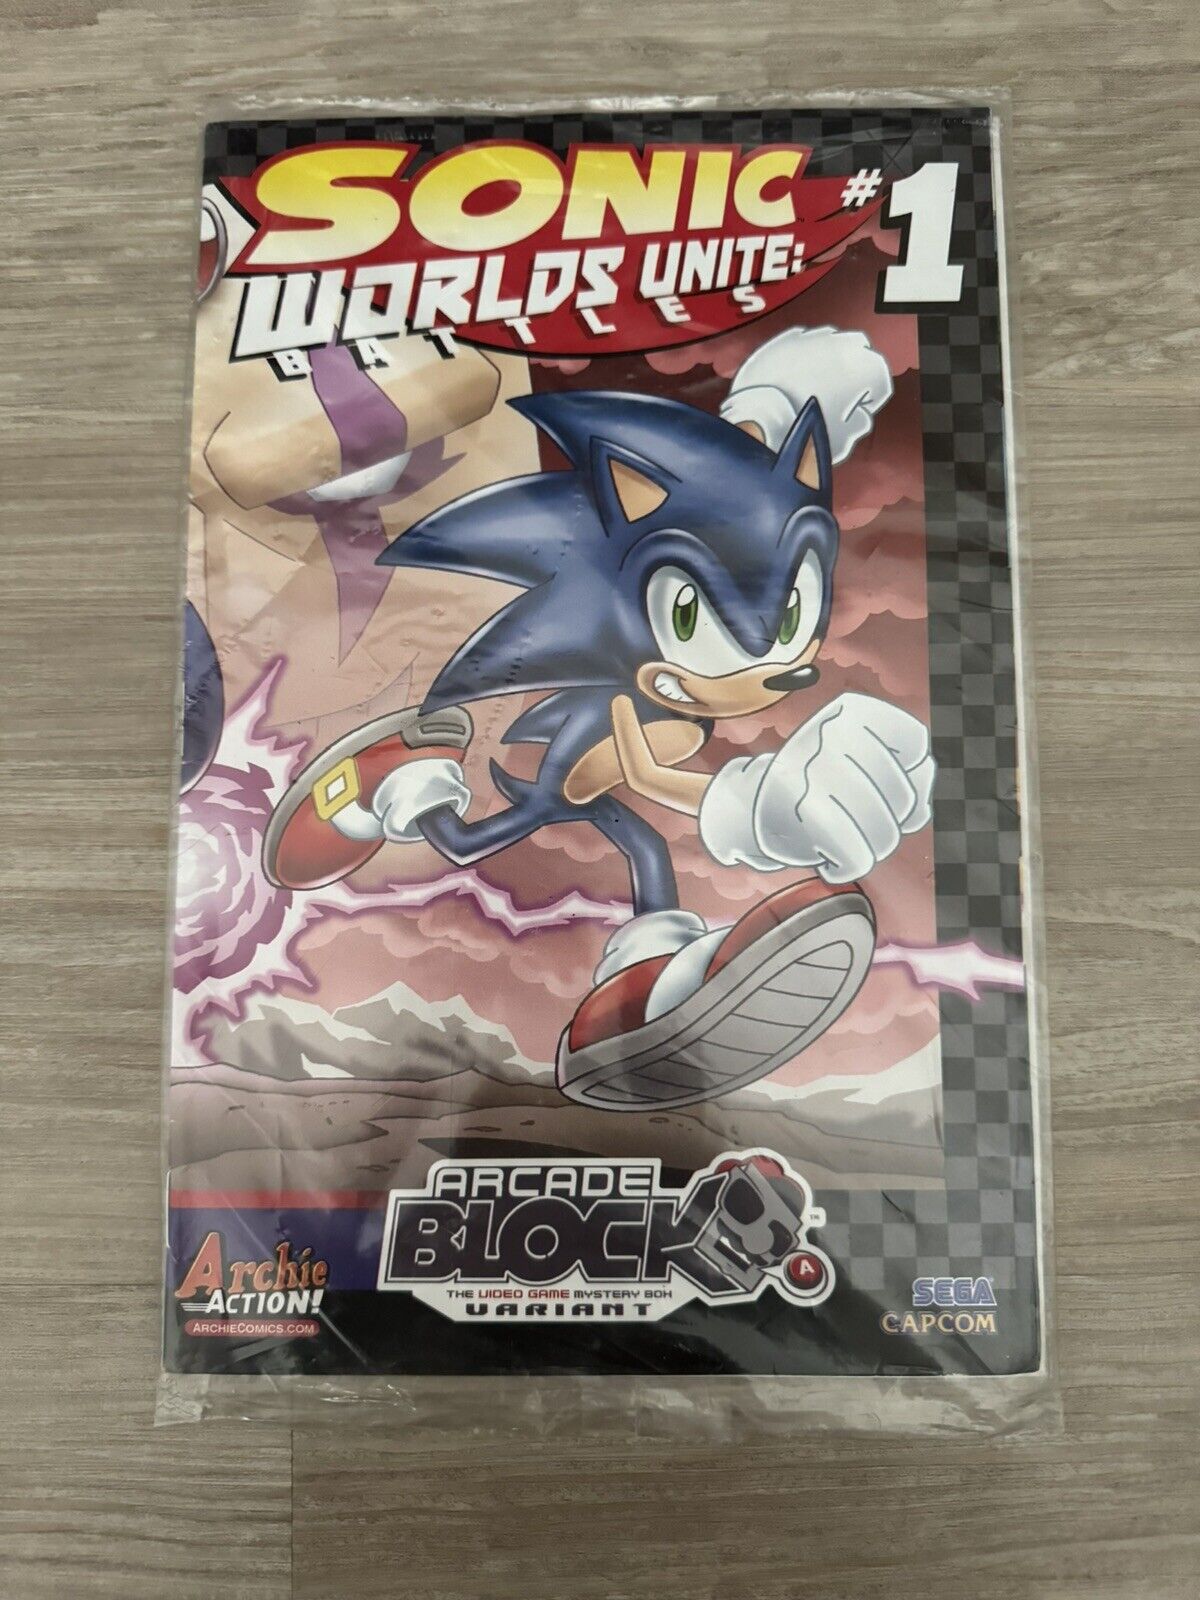 Vintage Archie Action Sonic Worlds Unite: Battles Issue #1 - Sealed